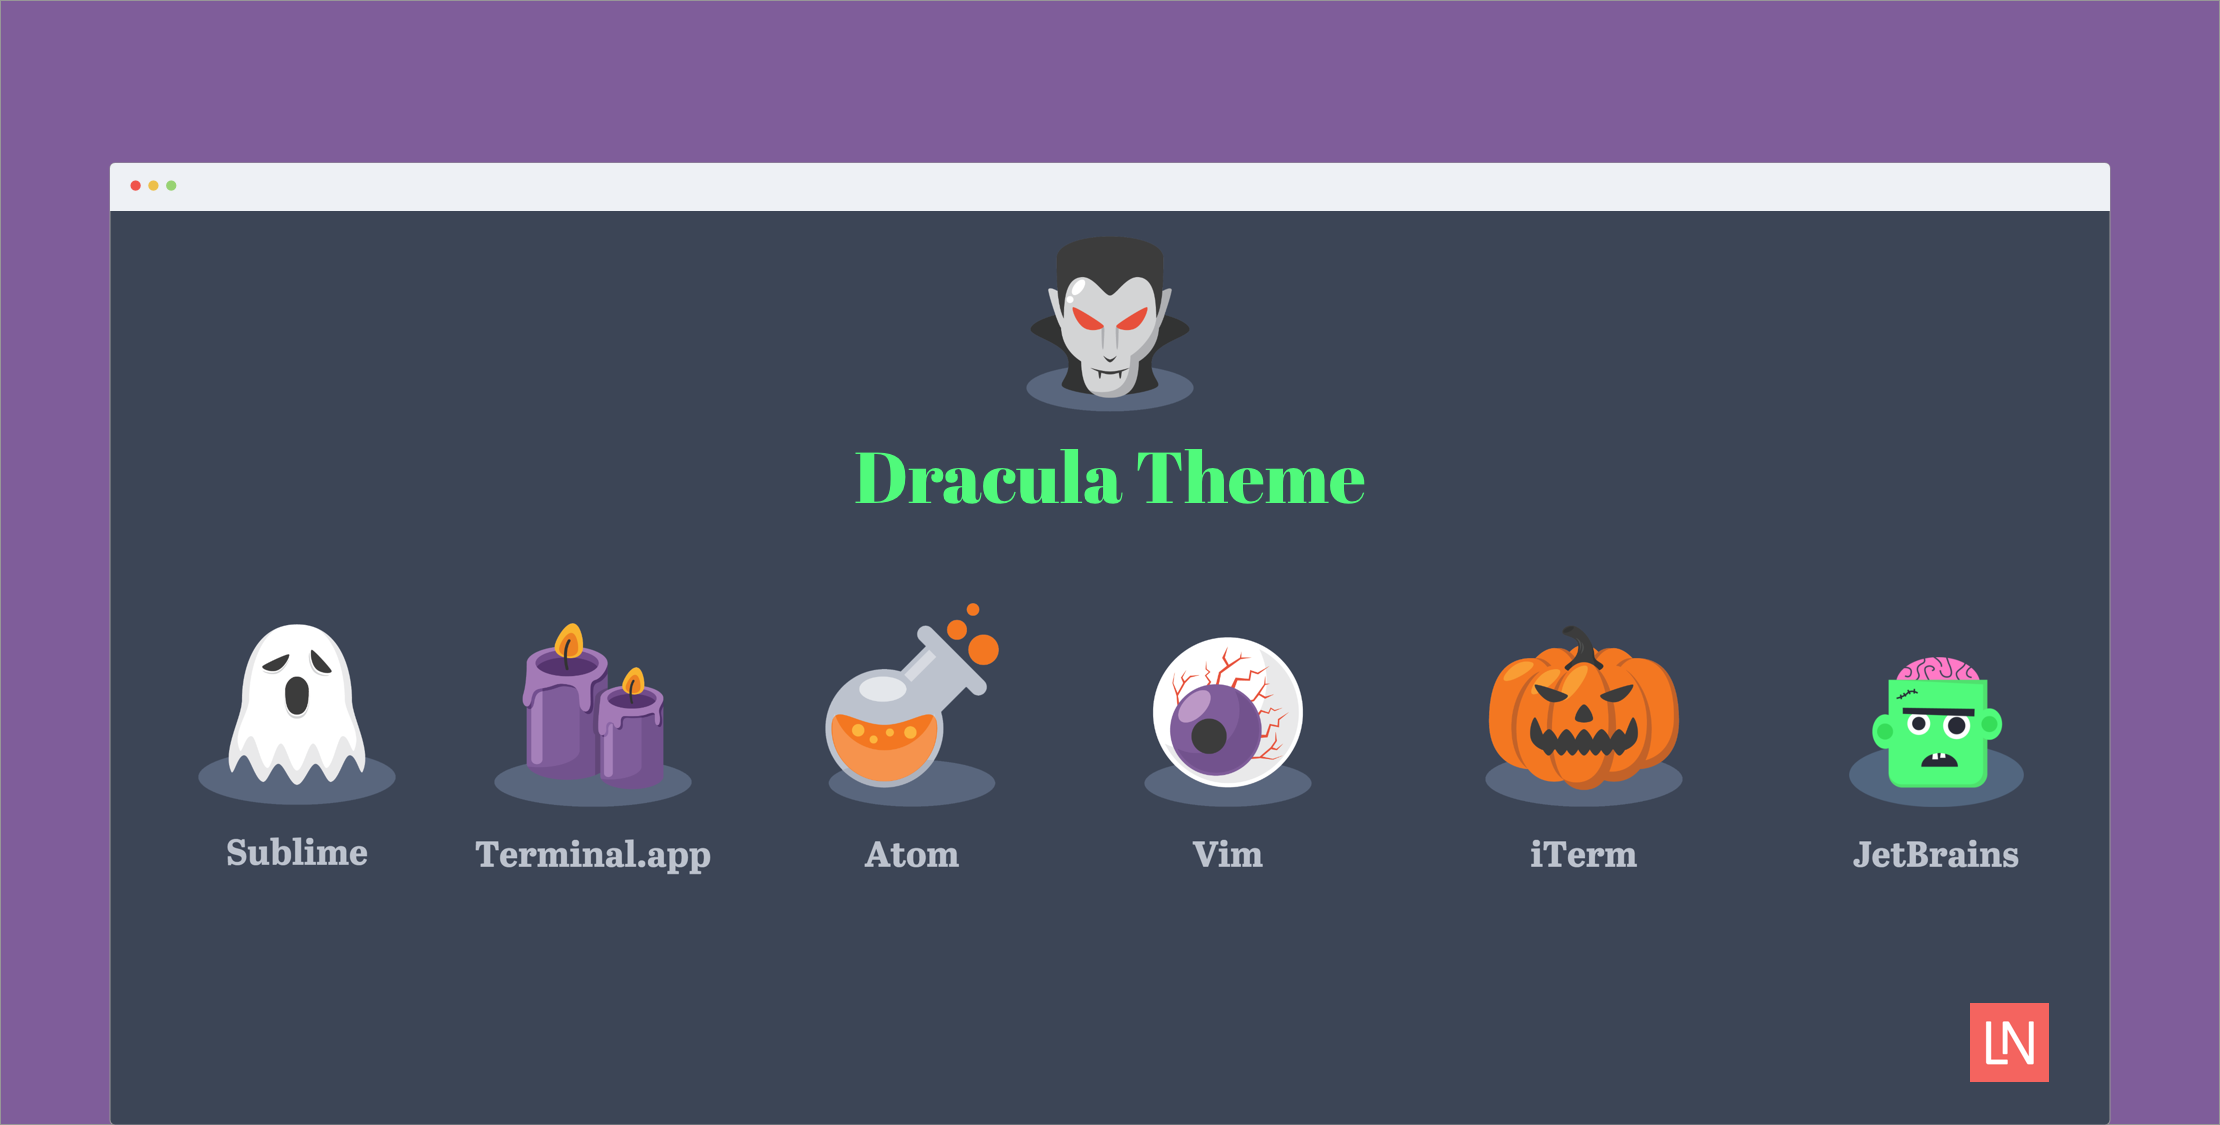 Get your IDE ready for Halloween with the Dracula Theme image